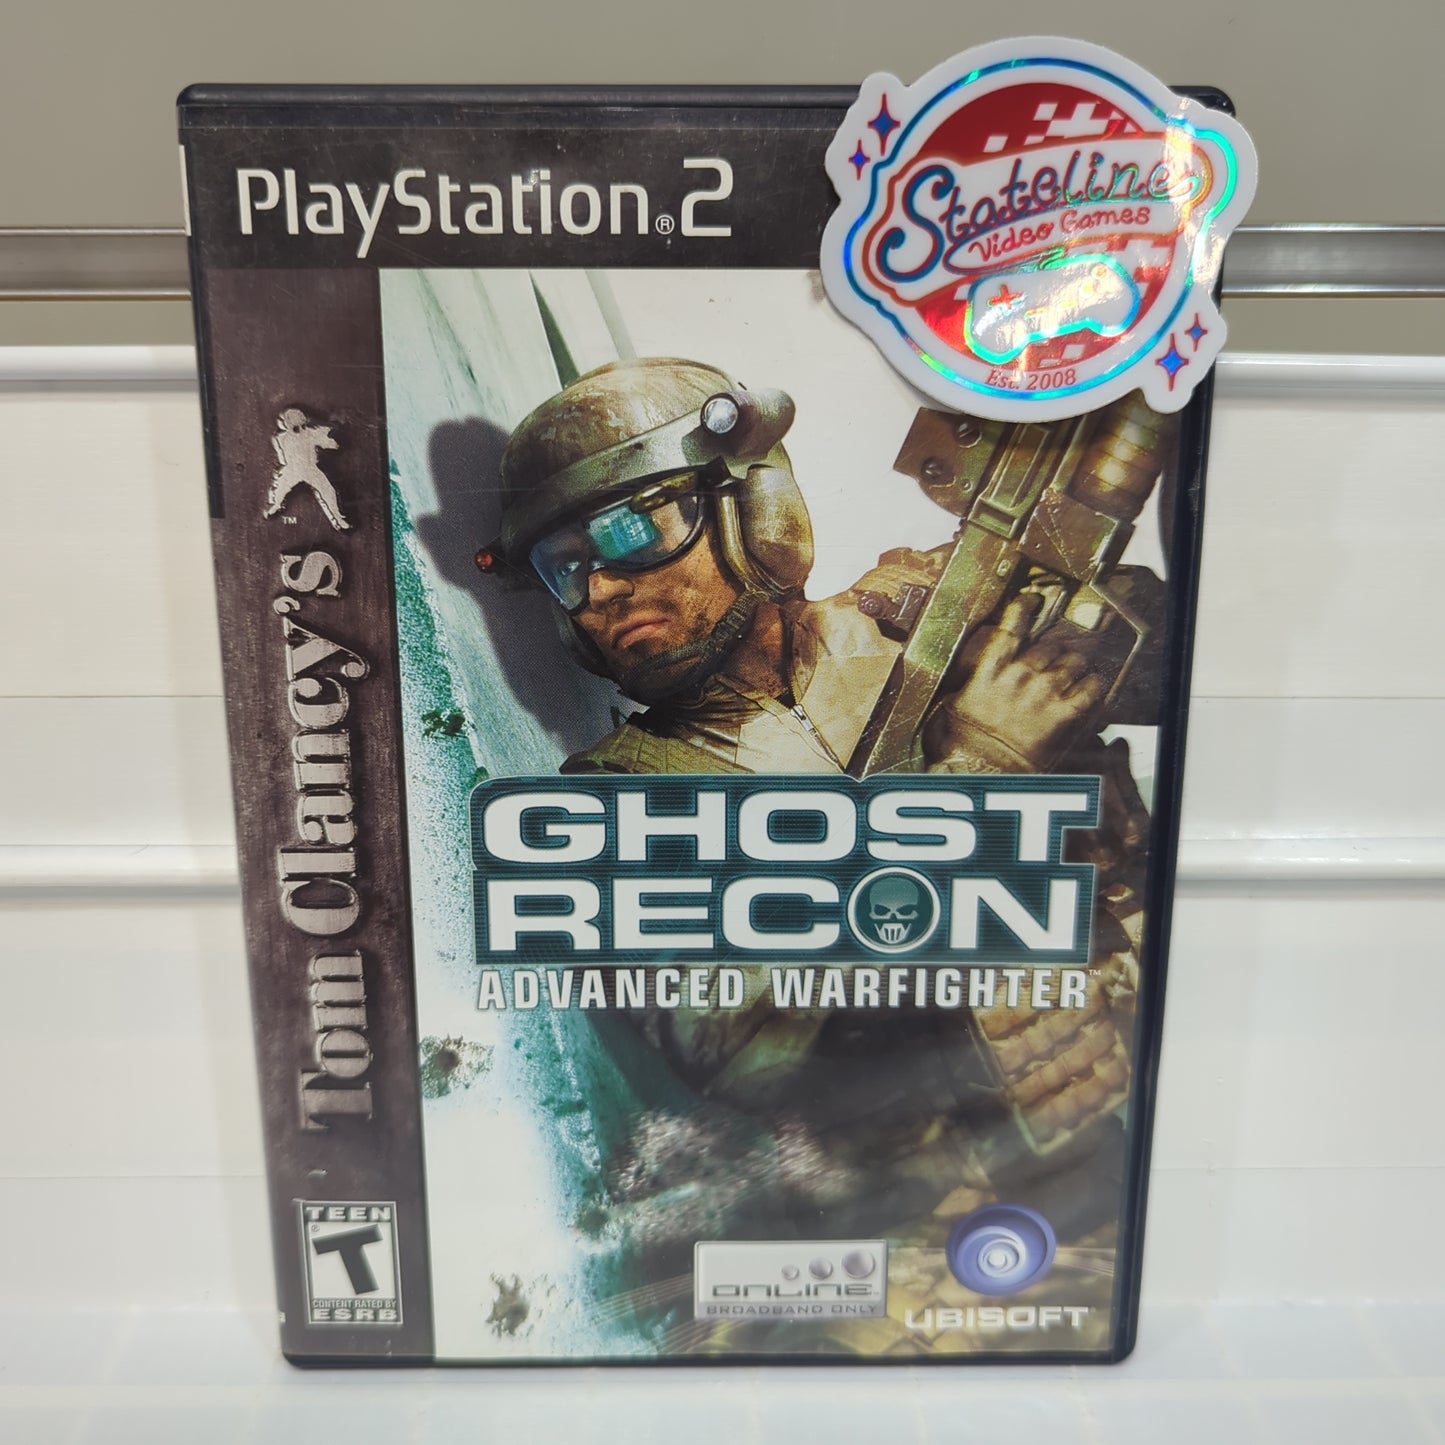 Ghost Recon Advanced Warfighter - Playstation 2